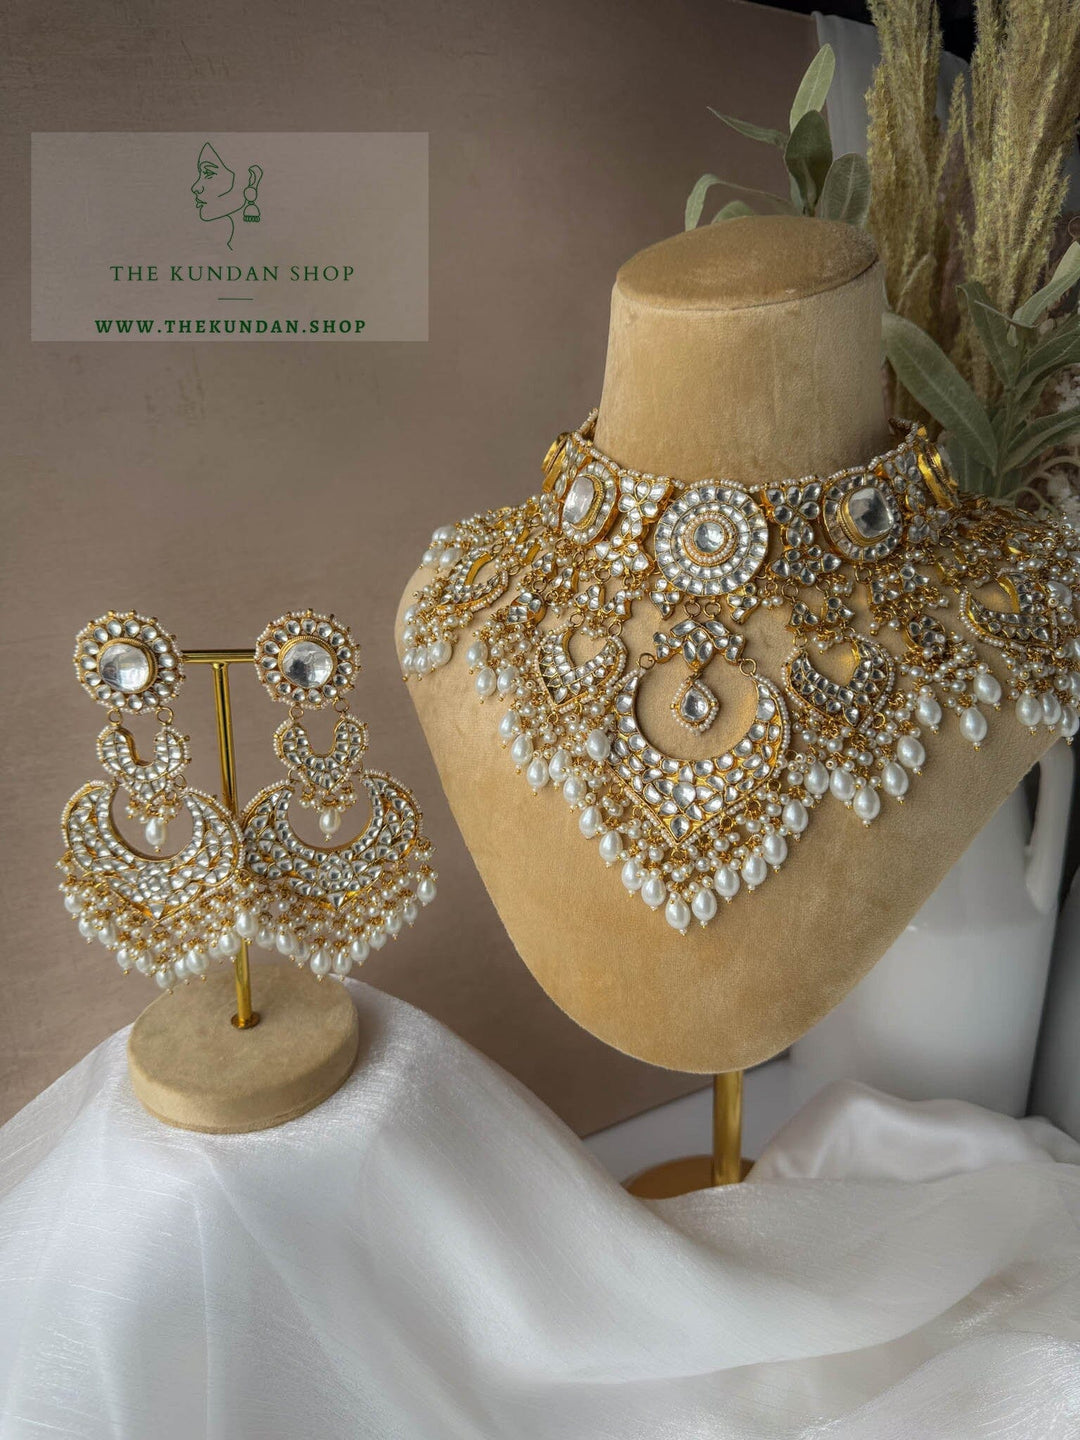 Valid in Pearls Necklace Sets THE KUNDAN SHOP 